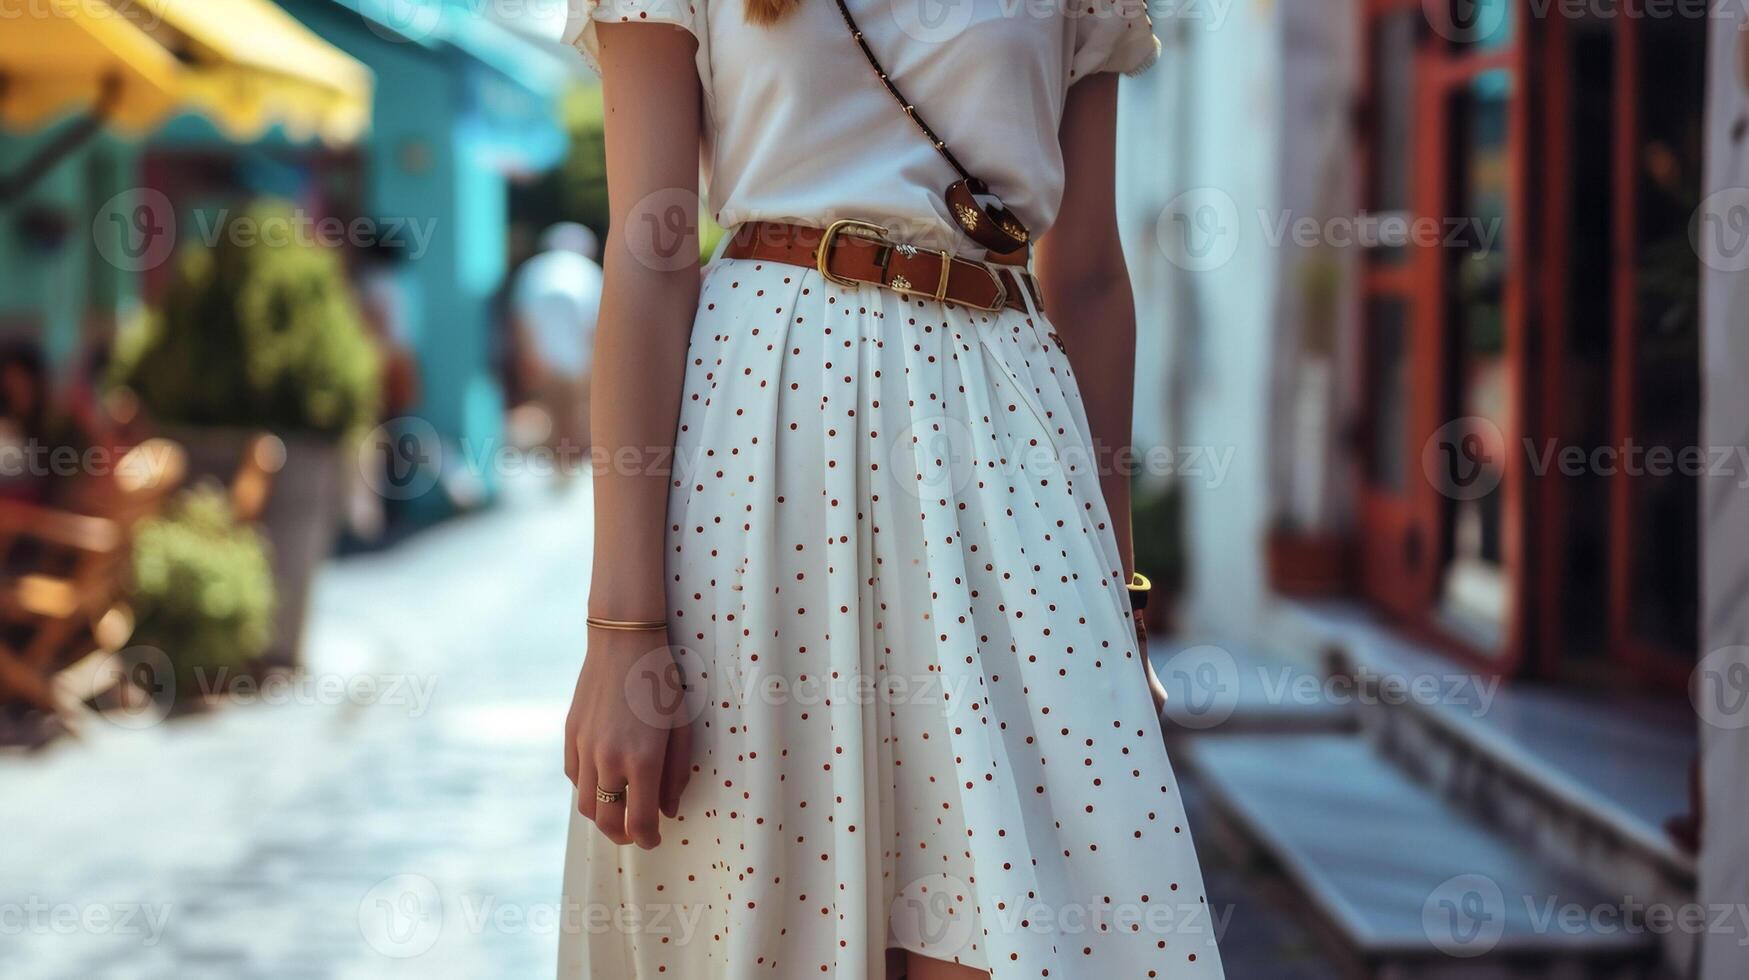 A white midi skirt with a playful polkadot pattern and a statement belt is perfect for a day of shopping and sightseeing in a charming small town photo